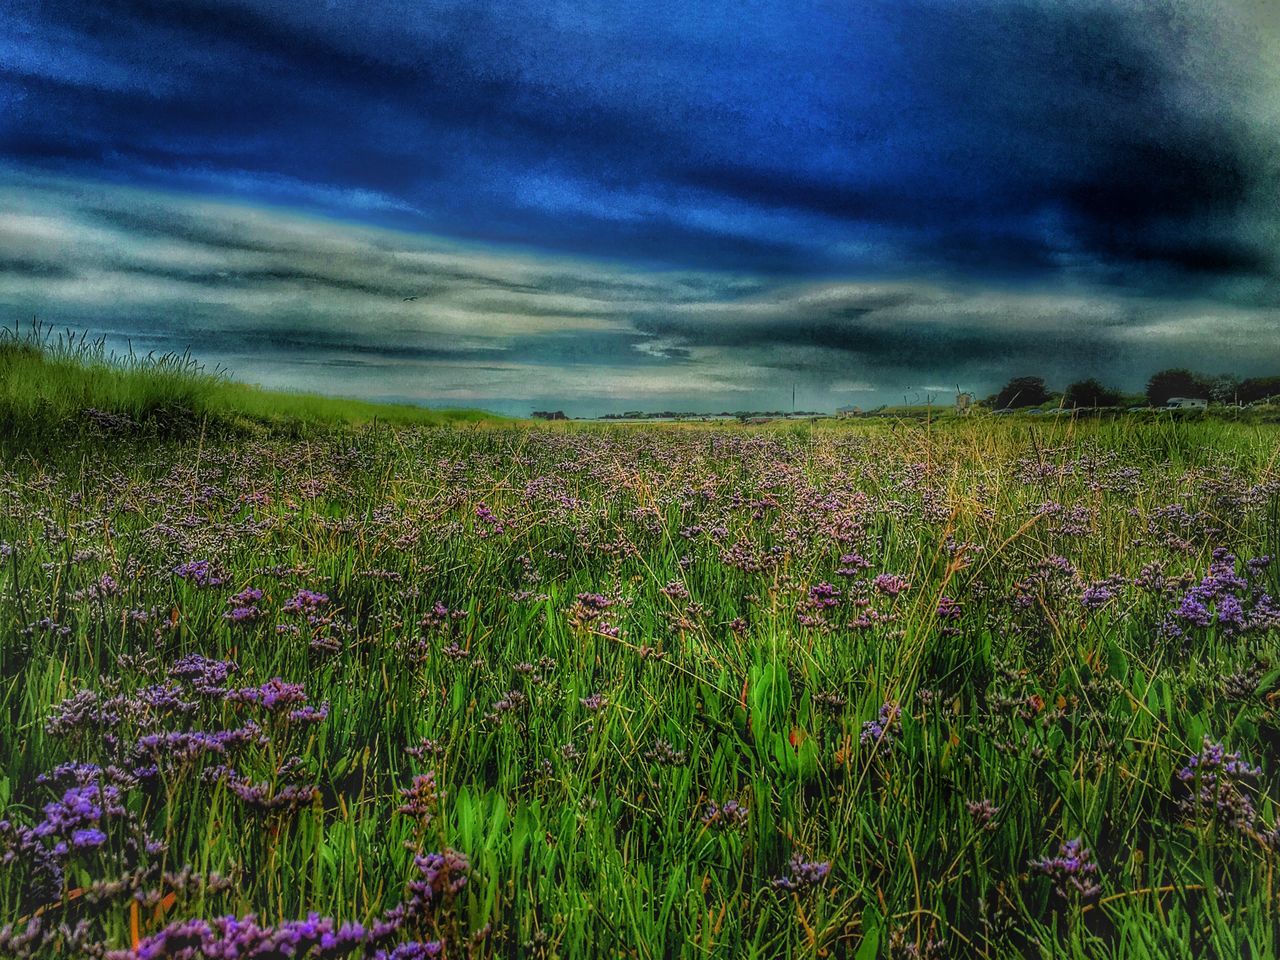 sky, flower, field, beauty in nature, cloud - sky, tranquil scene, growth, cloudy, landscape, tranquility, nature, scenics, freshness, plant, cloud, rural scene, grass, idyllic, fragility, weather, overcast, outdoors, blooming, no people, horizon over land, day, non-urban scene, purple, green color, dramatic sky, in bloom, remote, abundance, non urban scene